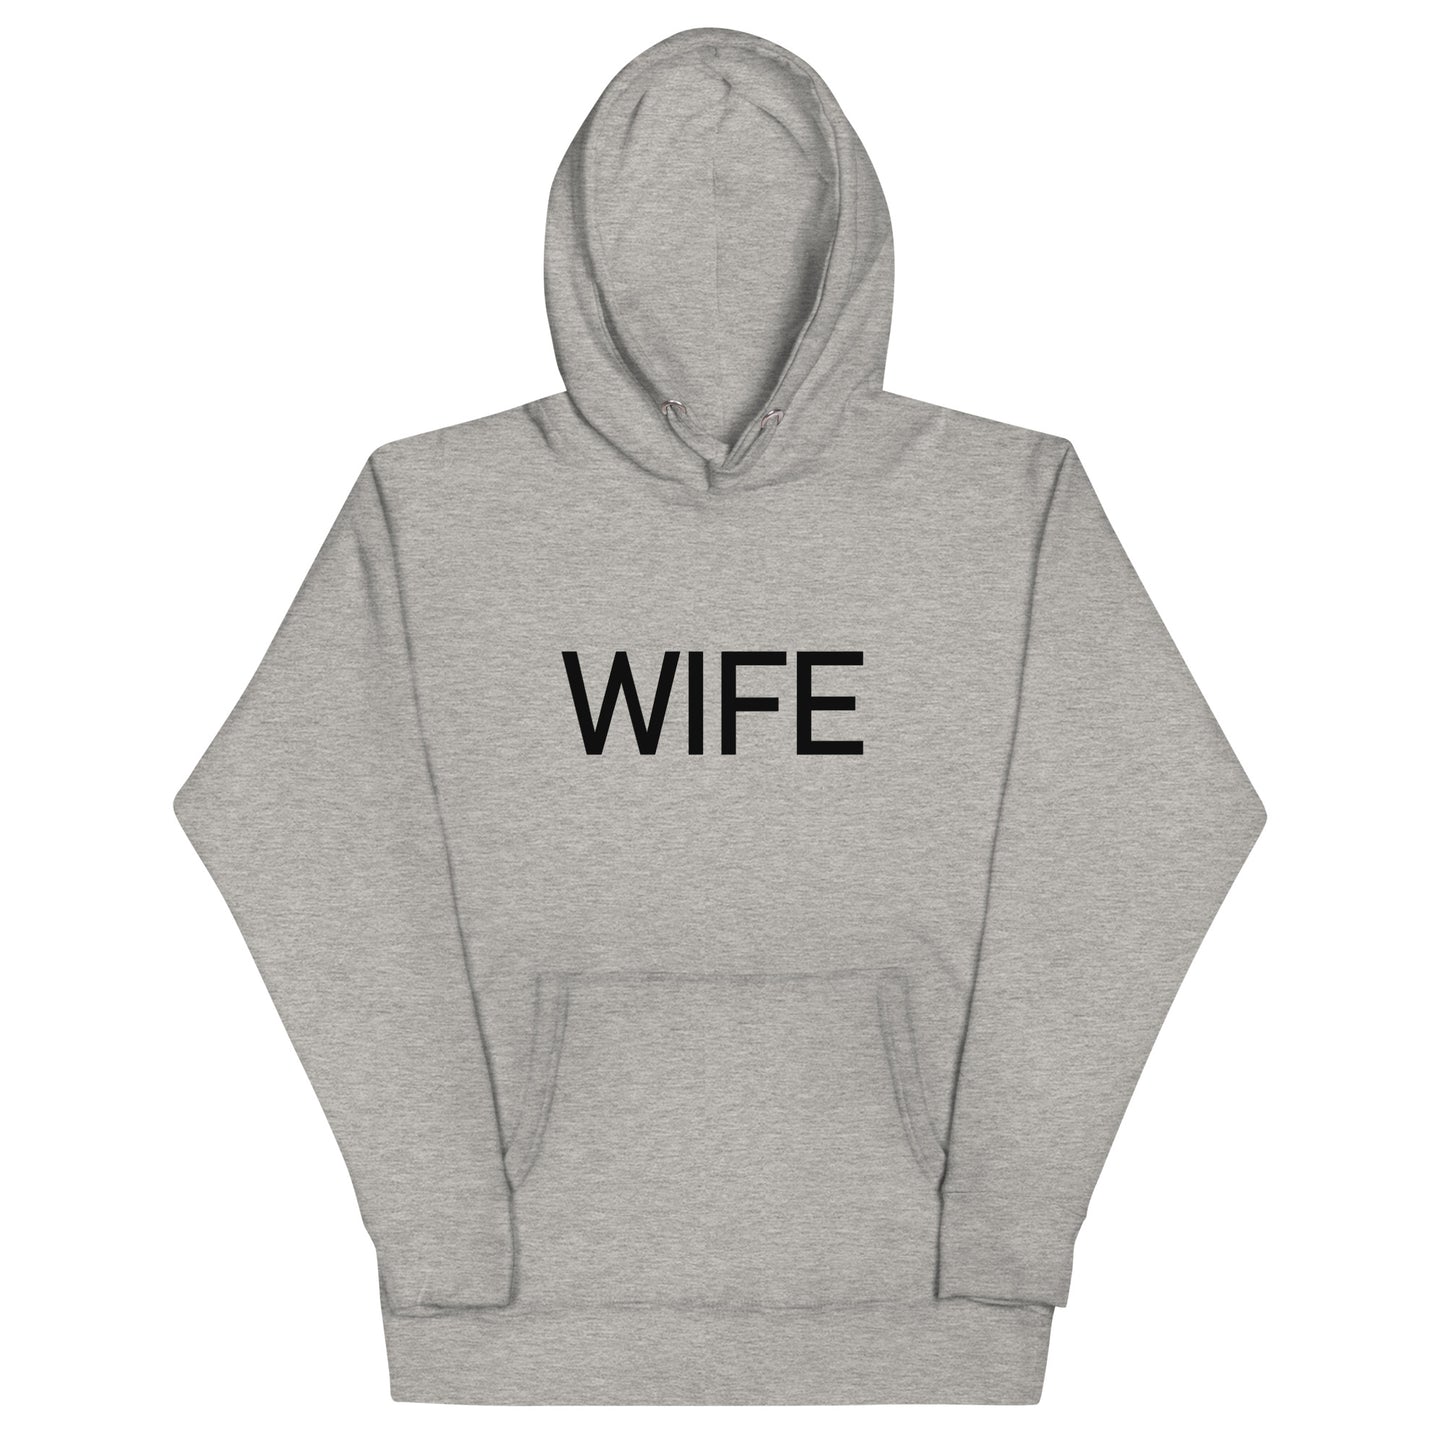 Wife - Sustainably Made Hoodie